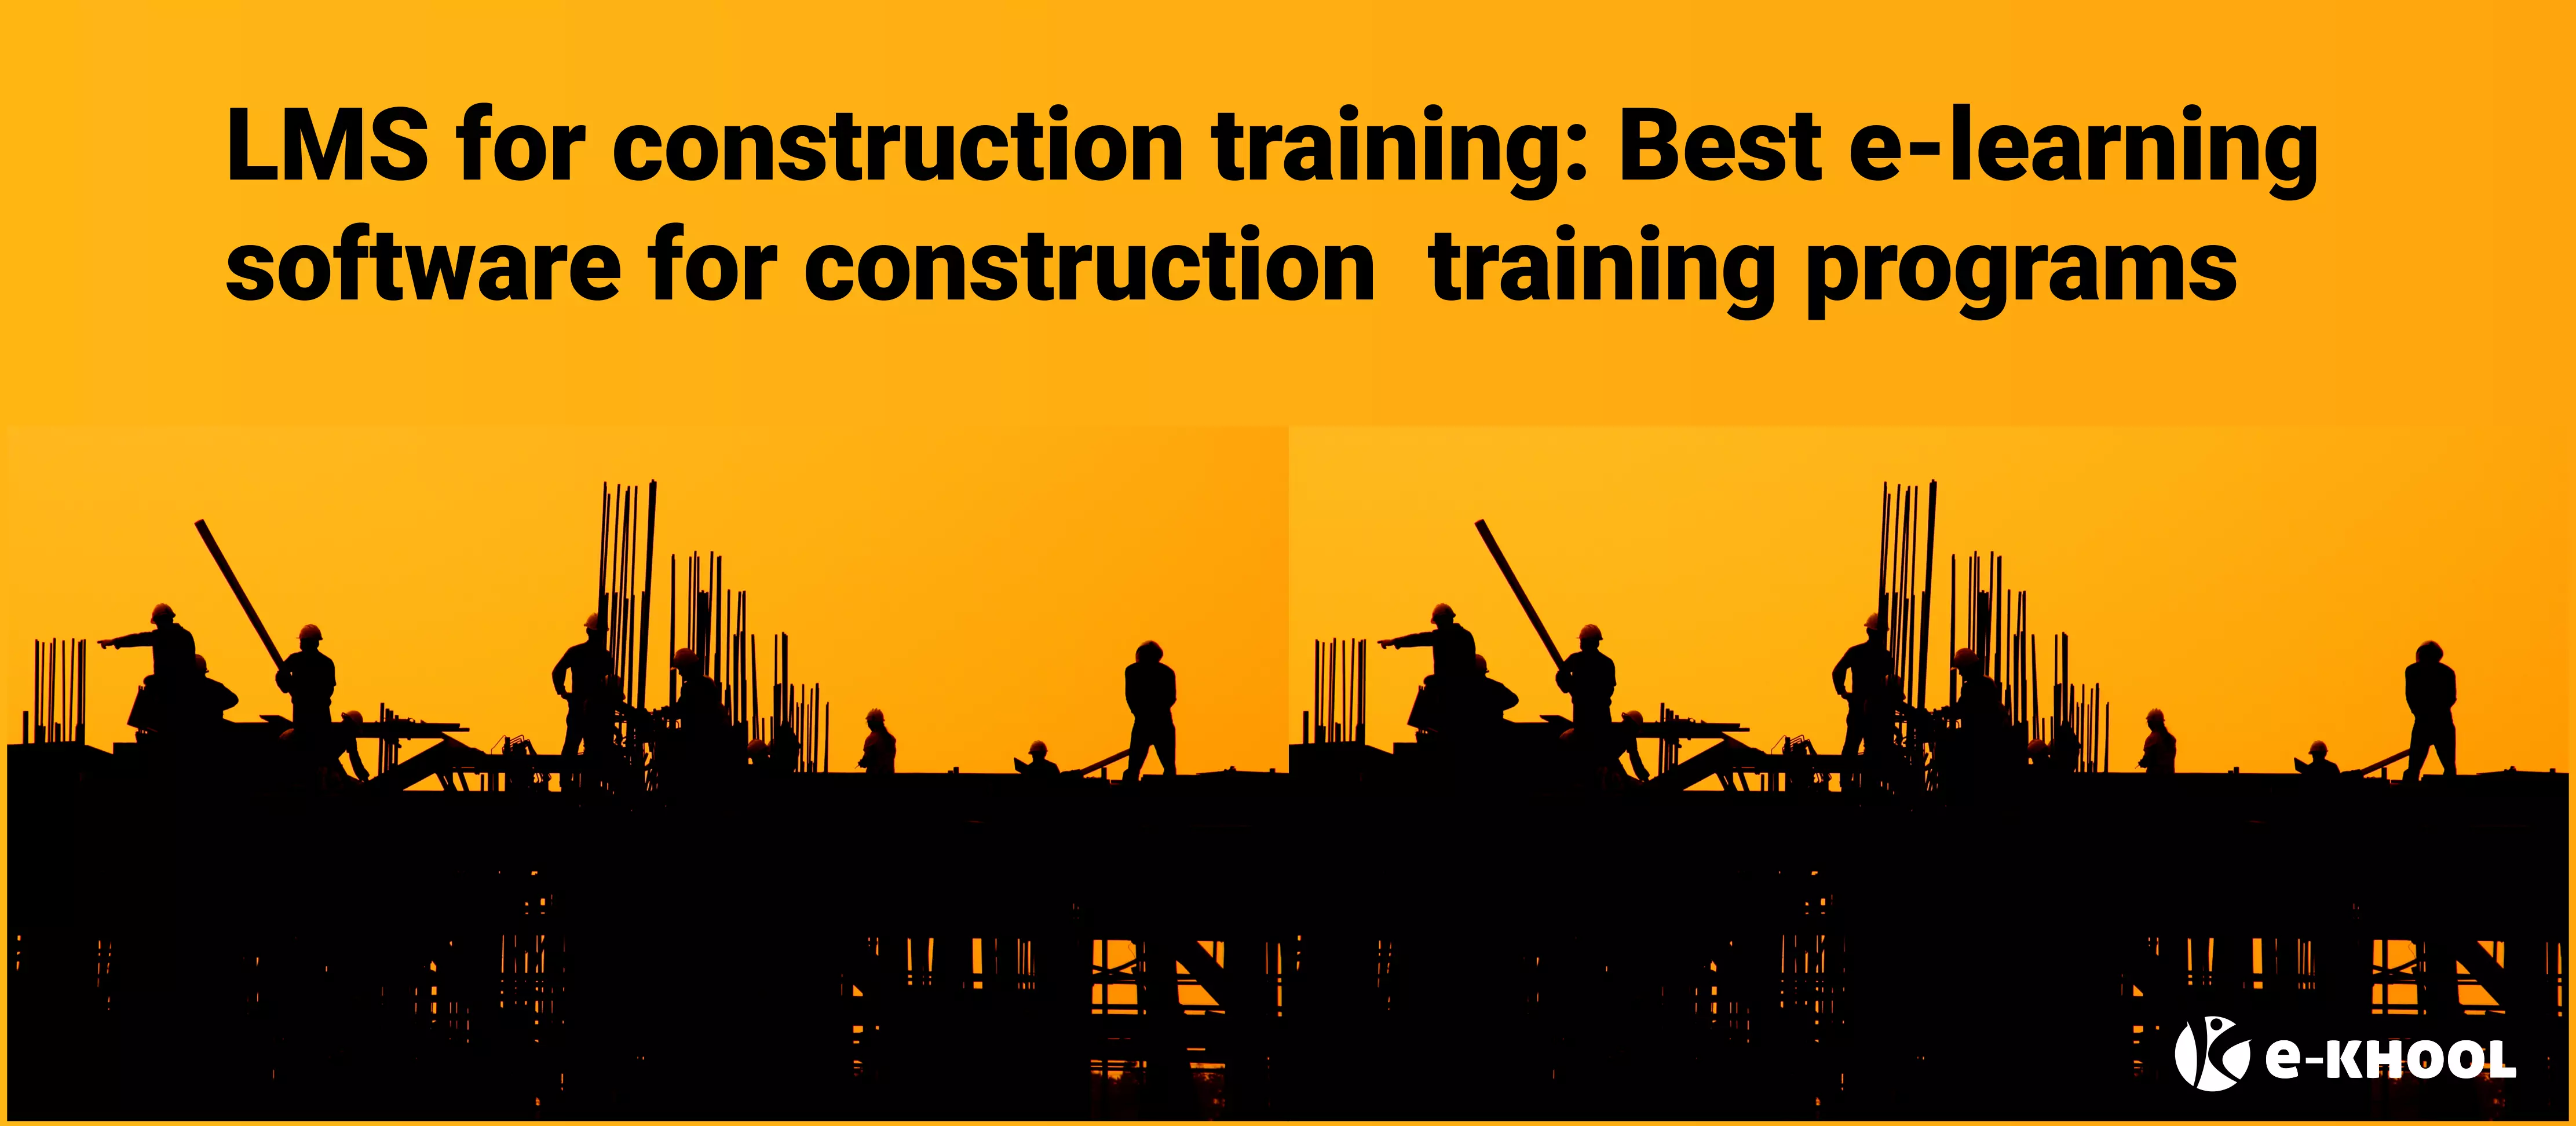 LMS for construction training: Best e-learning software for infrastructure projects